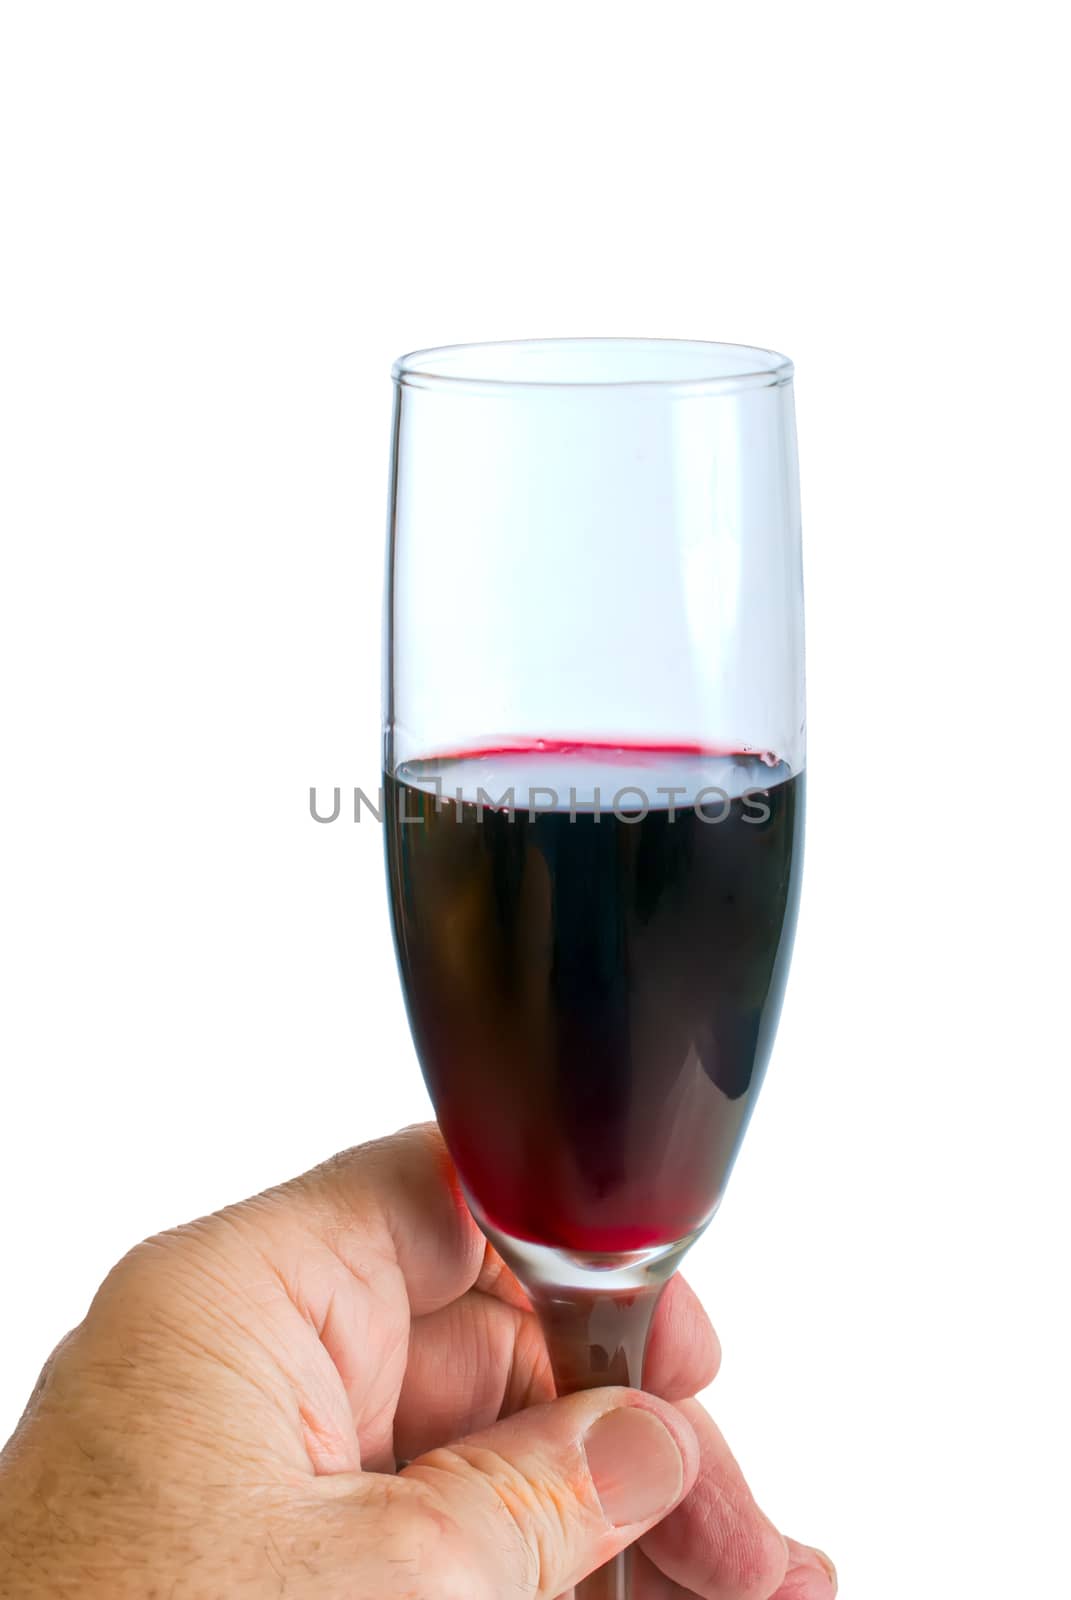 Tasting a small glass of red wine